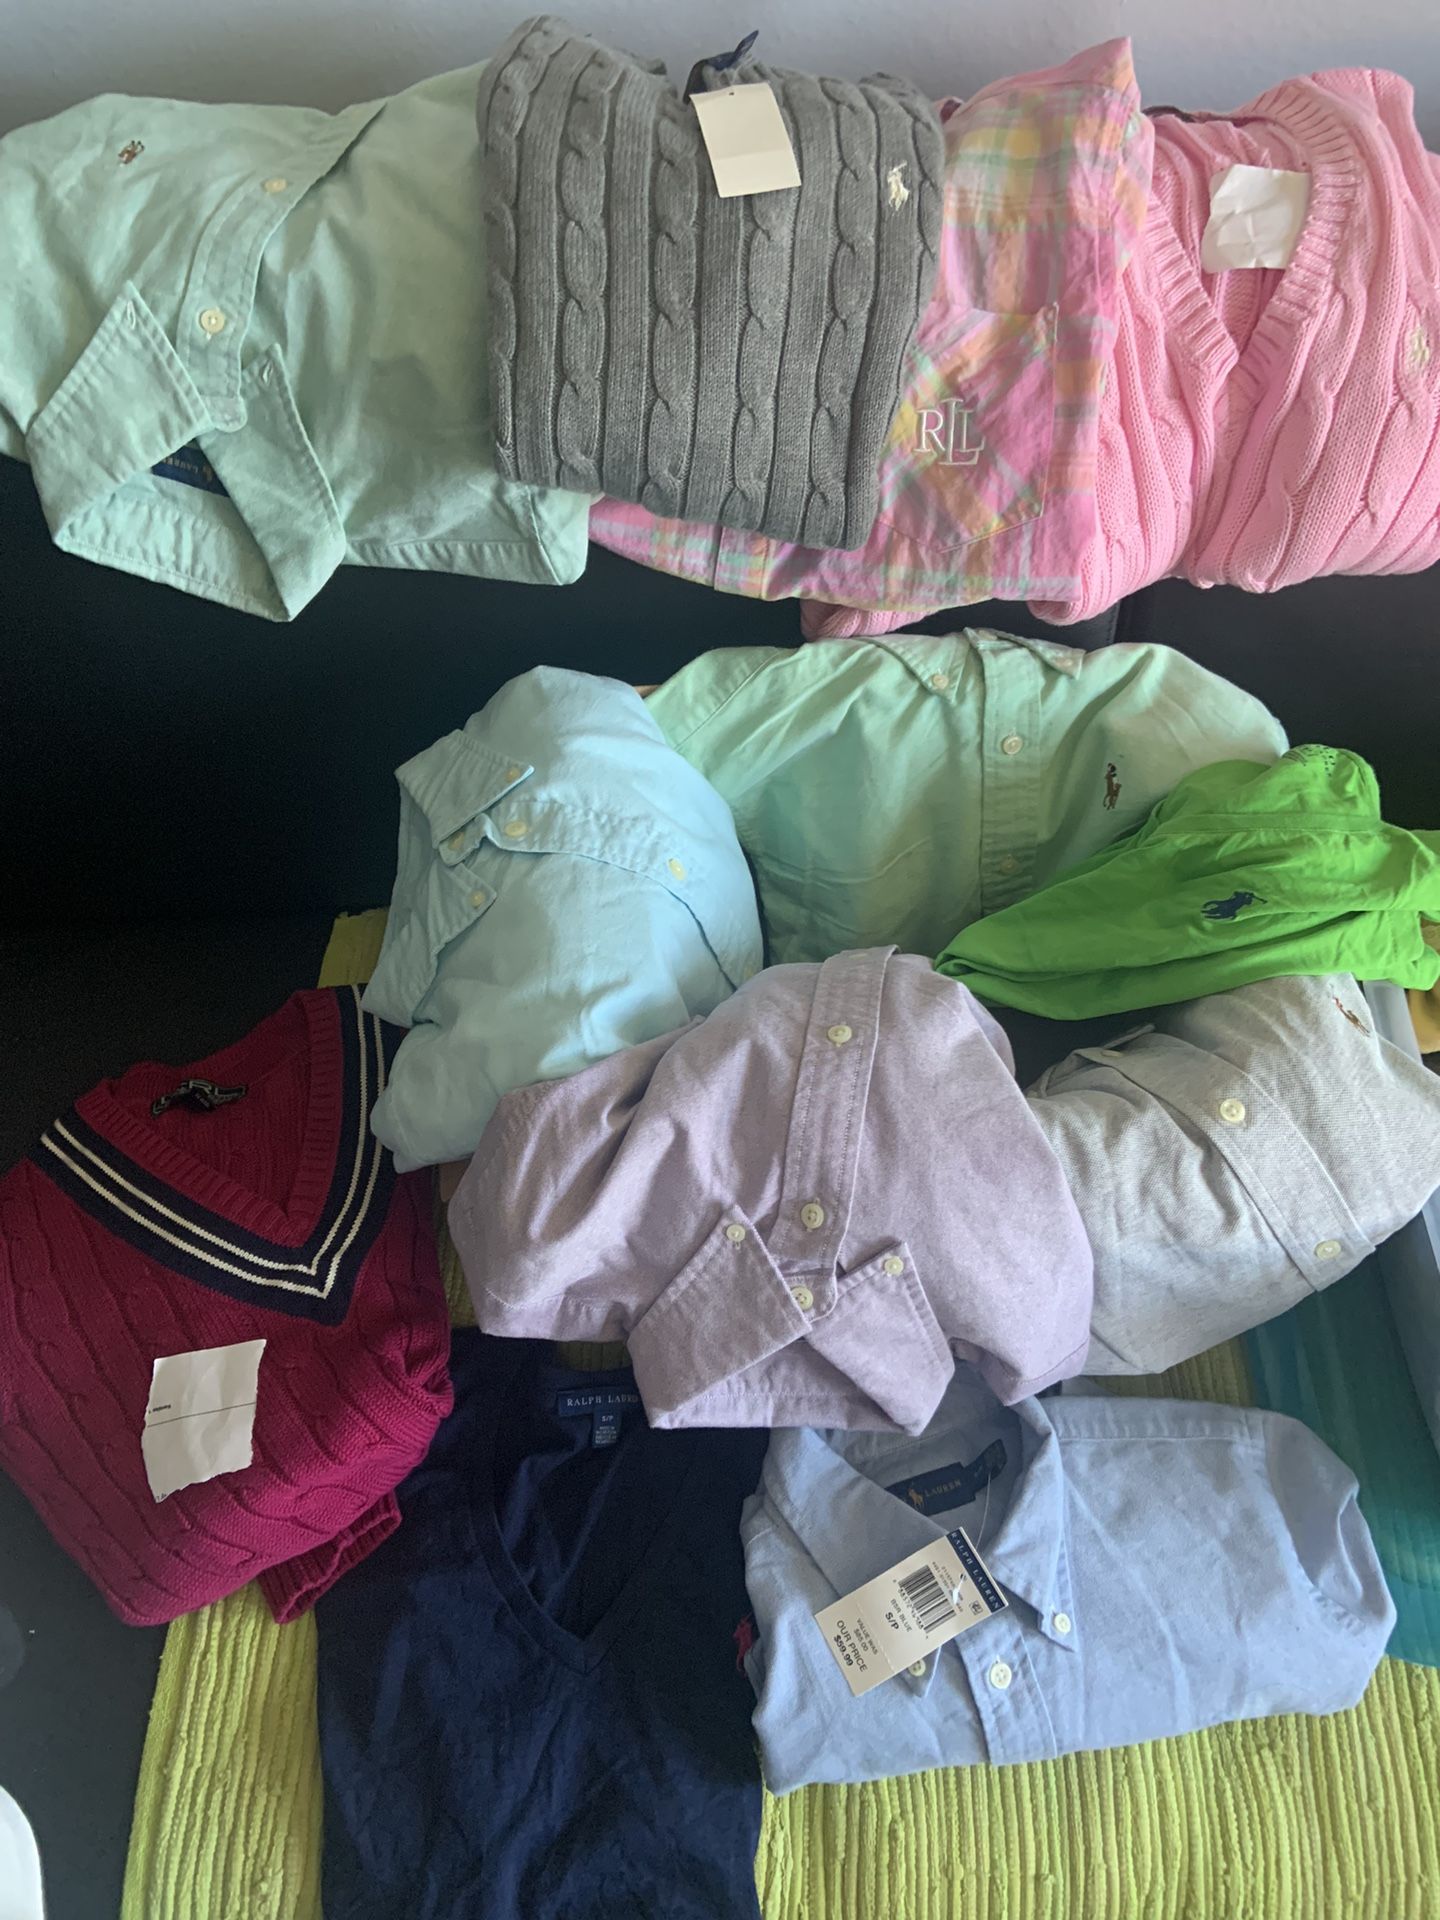 Clothing sale. New Tops. Brand Name Ralph Lauren Classic Tops. Xs And Small  $20-$50 Each 